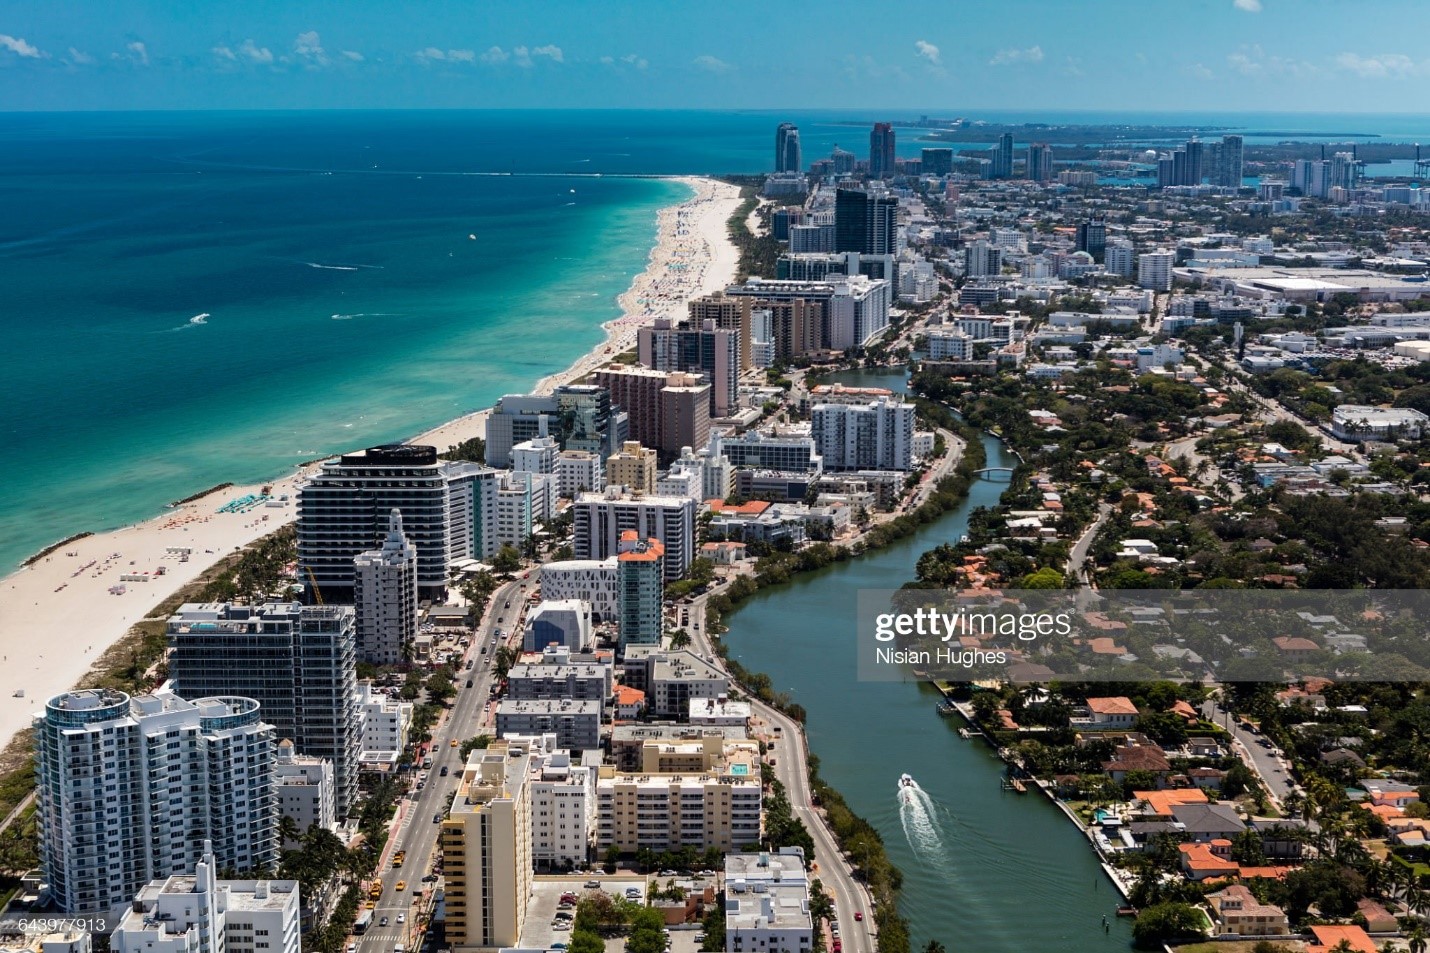 Aerial view of South Beach Miami, Florida. Cityscape with buildings along the beach on a beautiful sunny day, people on beach and ocean, Collins Avenue and boat on Indian Creek. 